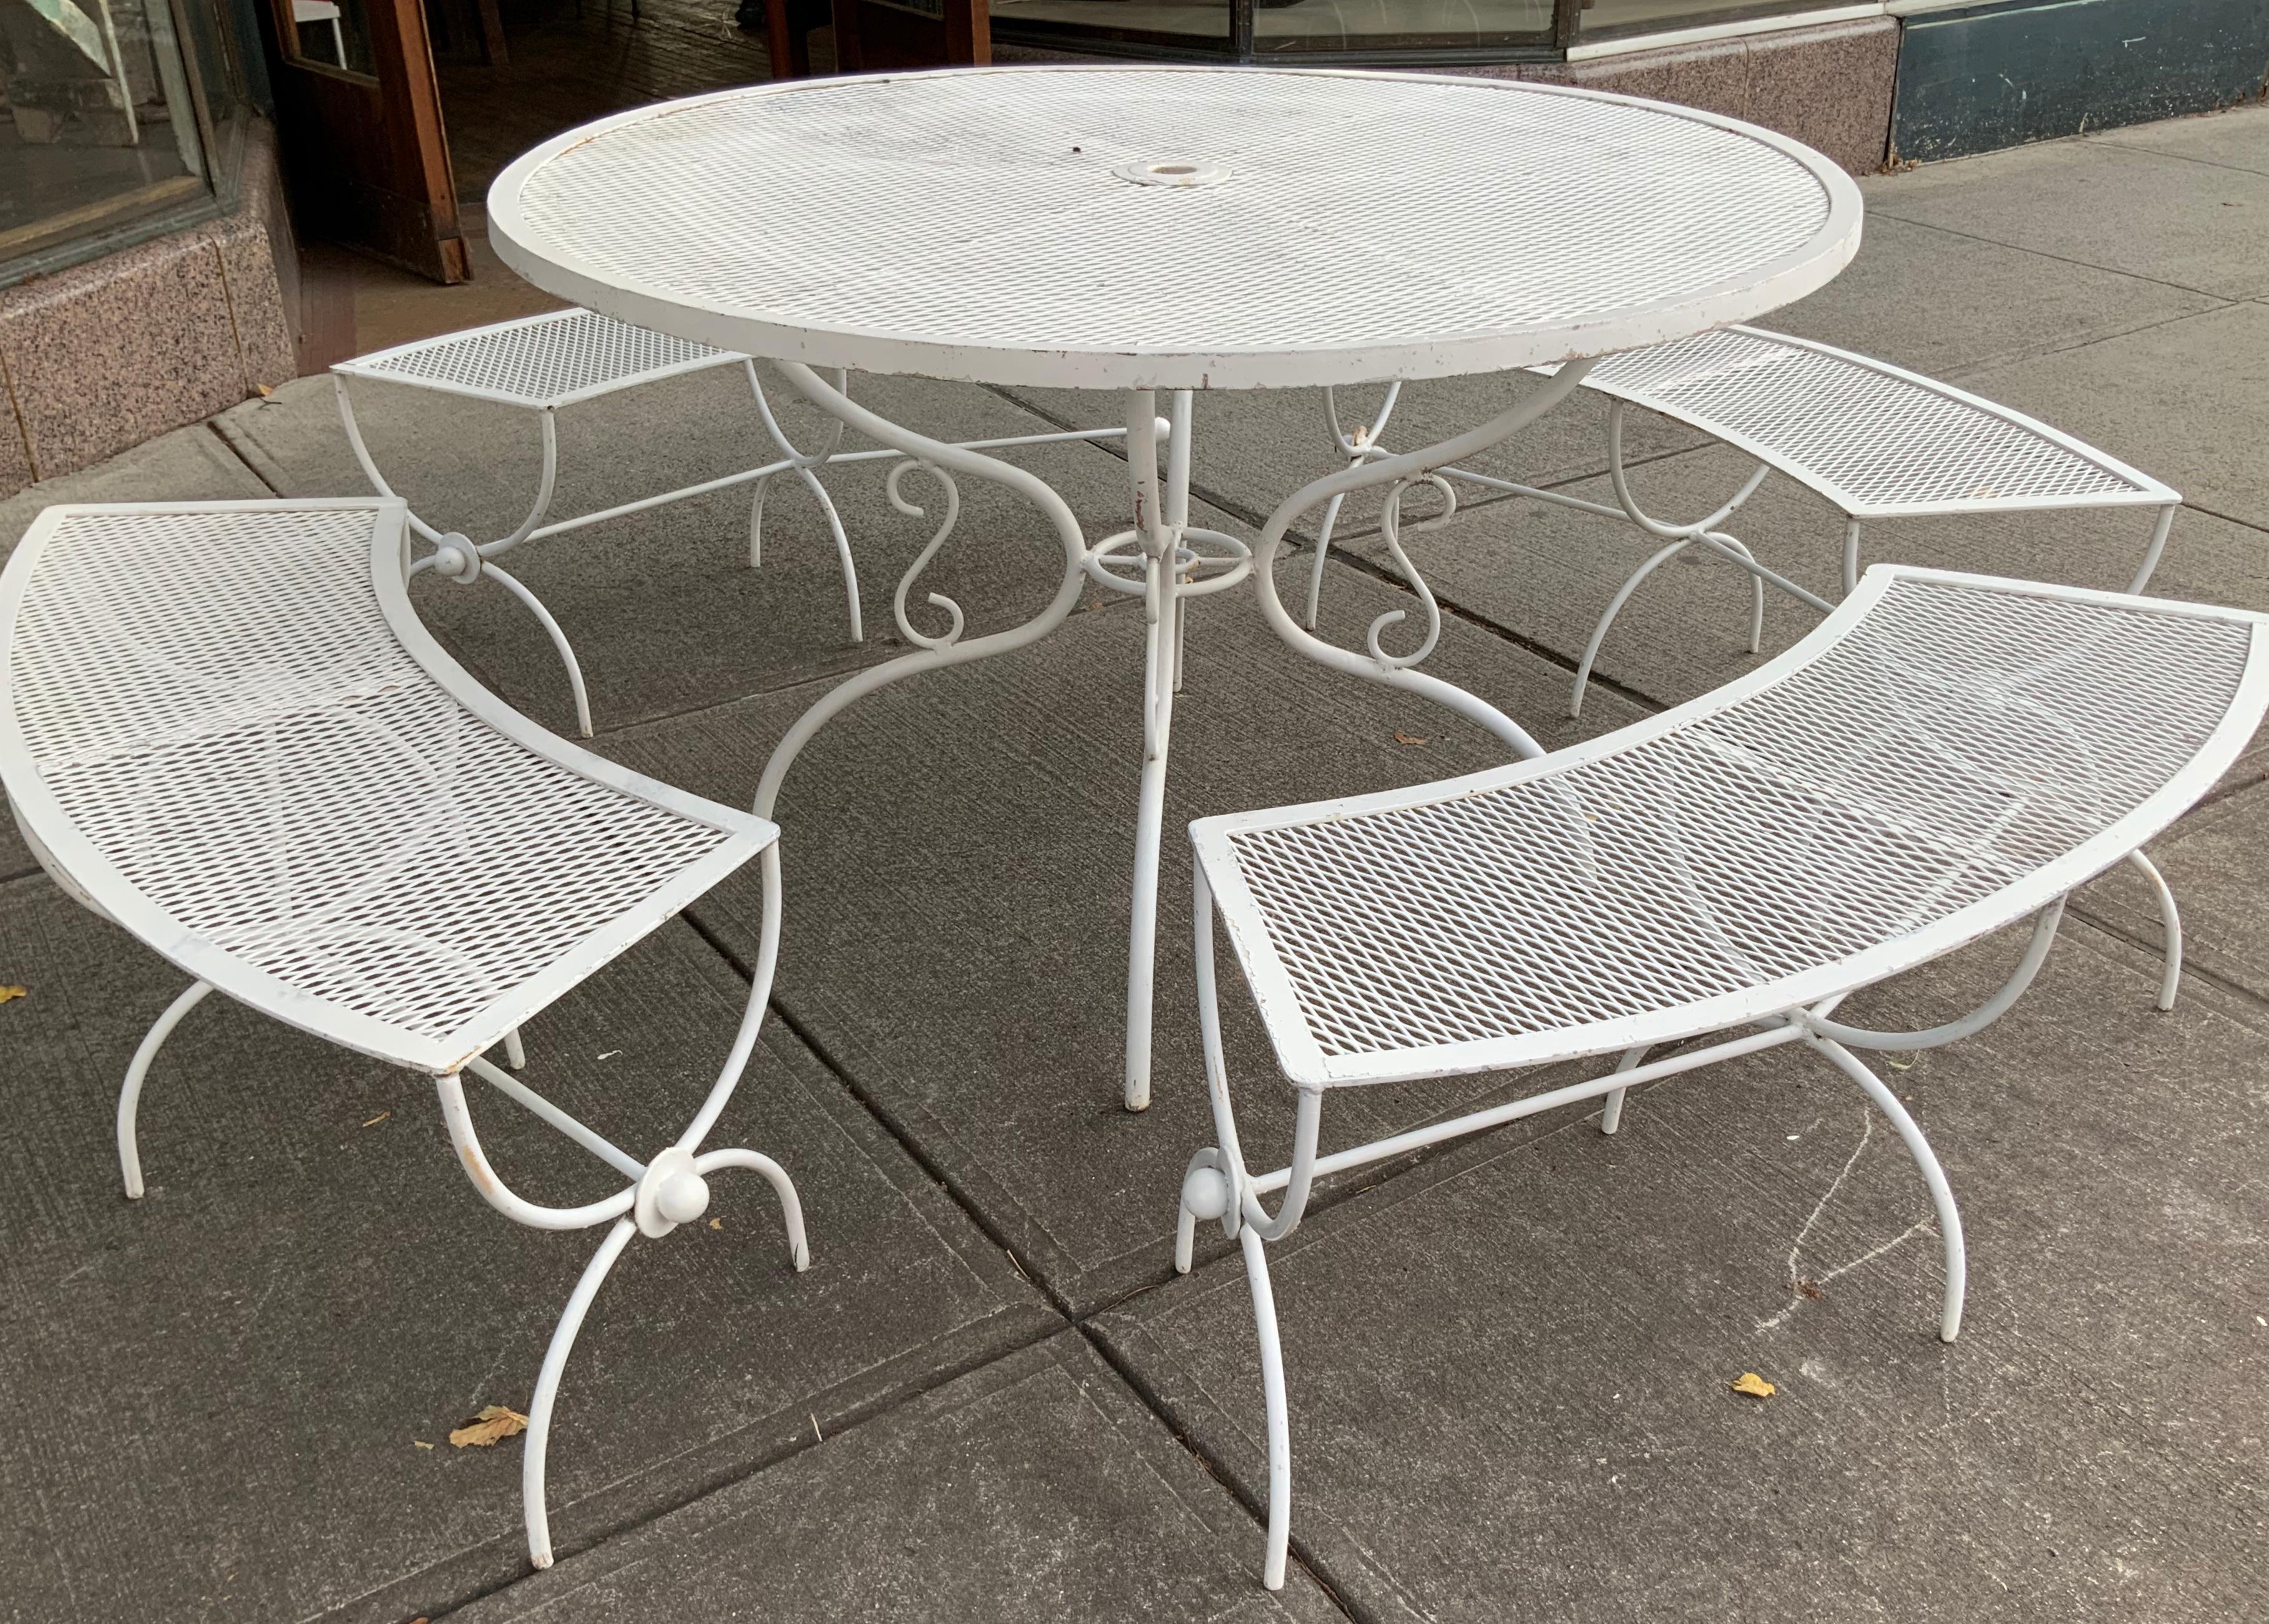 A beautiful vintage 1950s wrought iron dining set with a round table and set of four curved benches. The table with a scrolled base and the benches have Curule bases. In its original white painted finish, which shows average wear for the age.